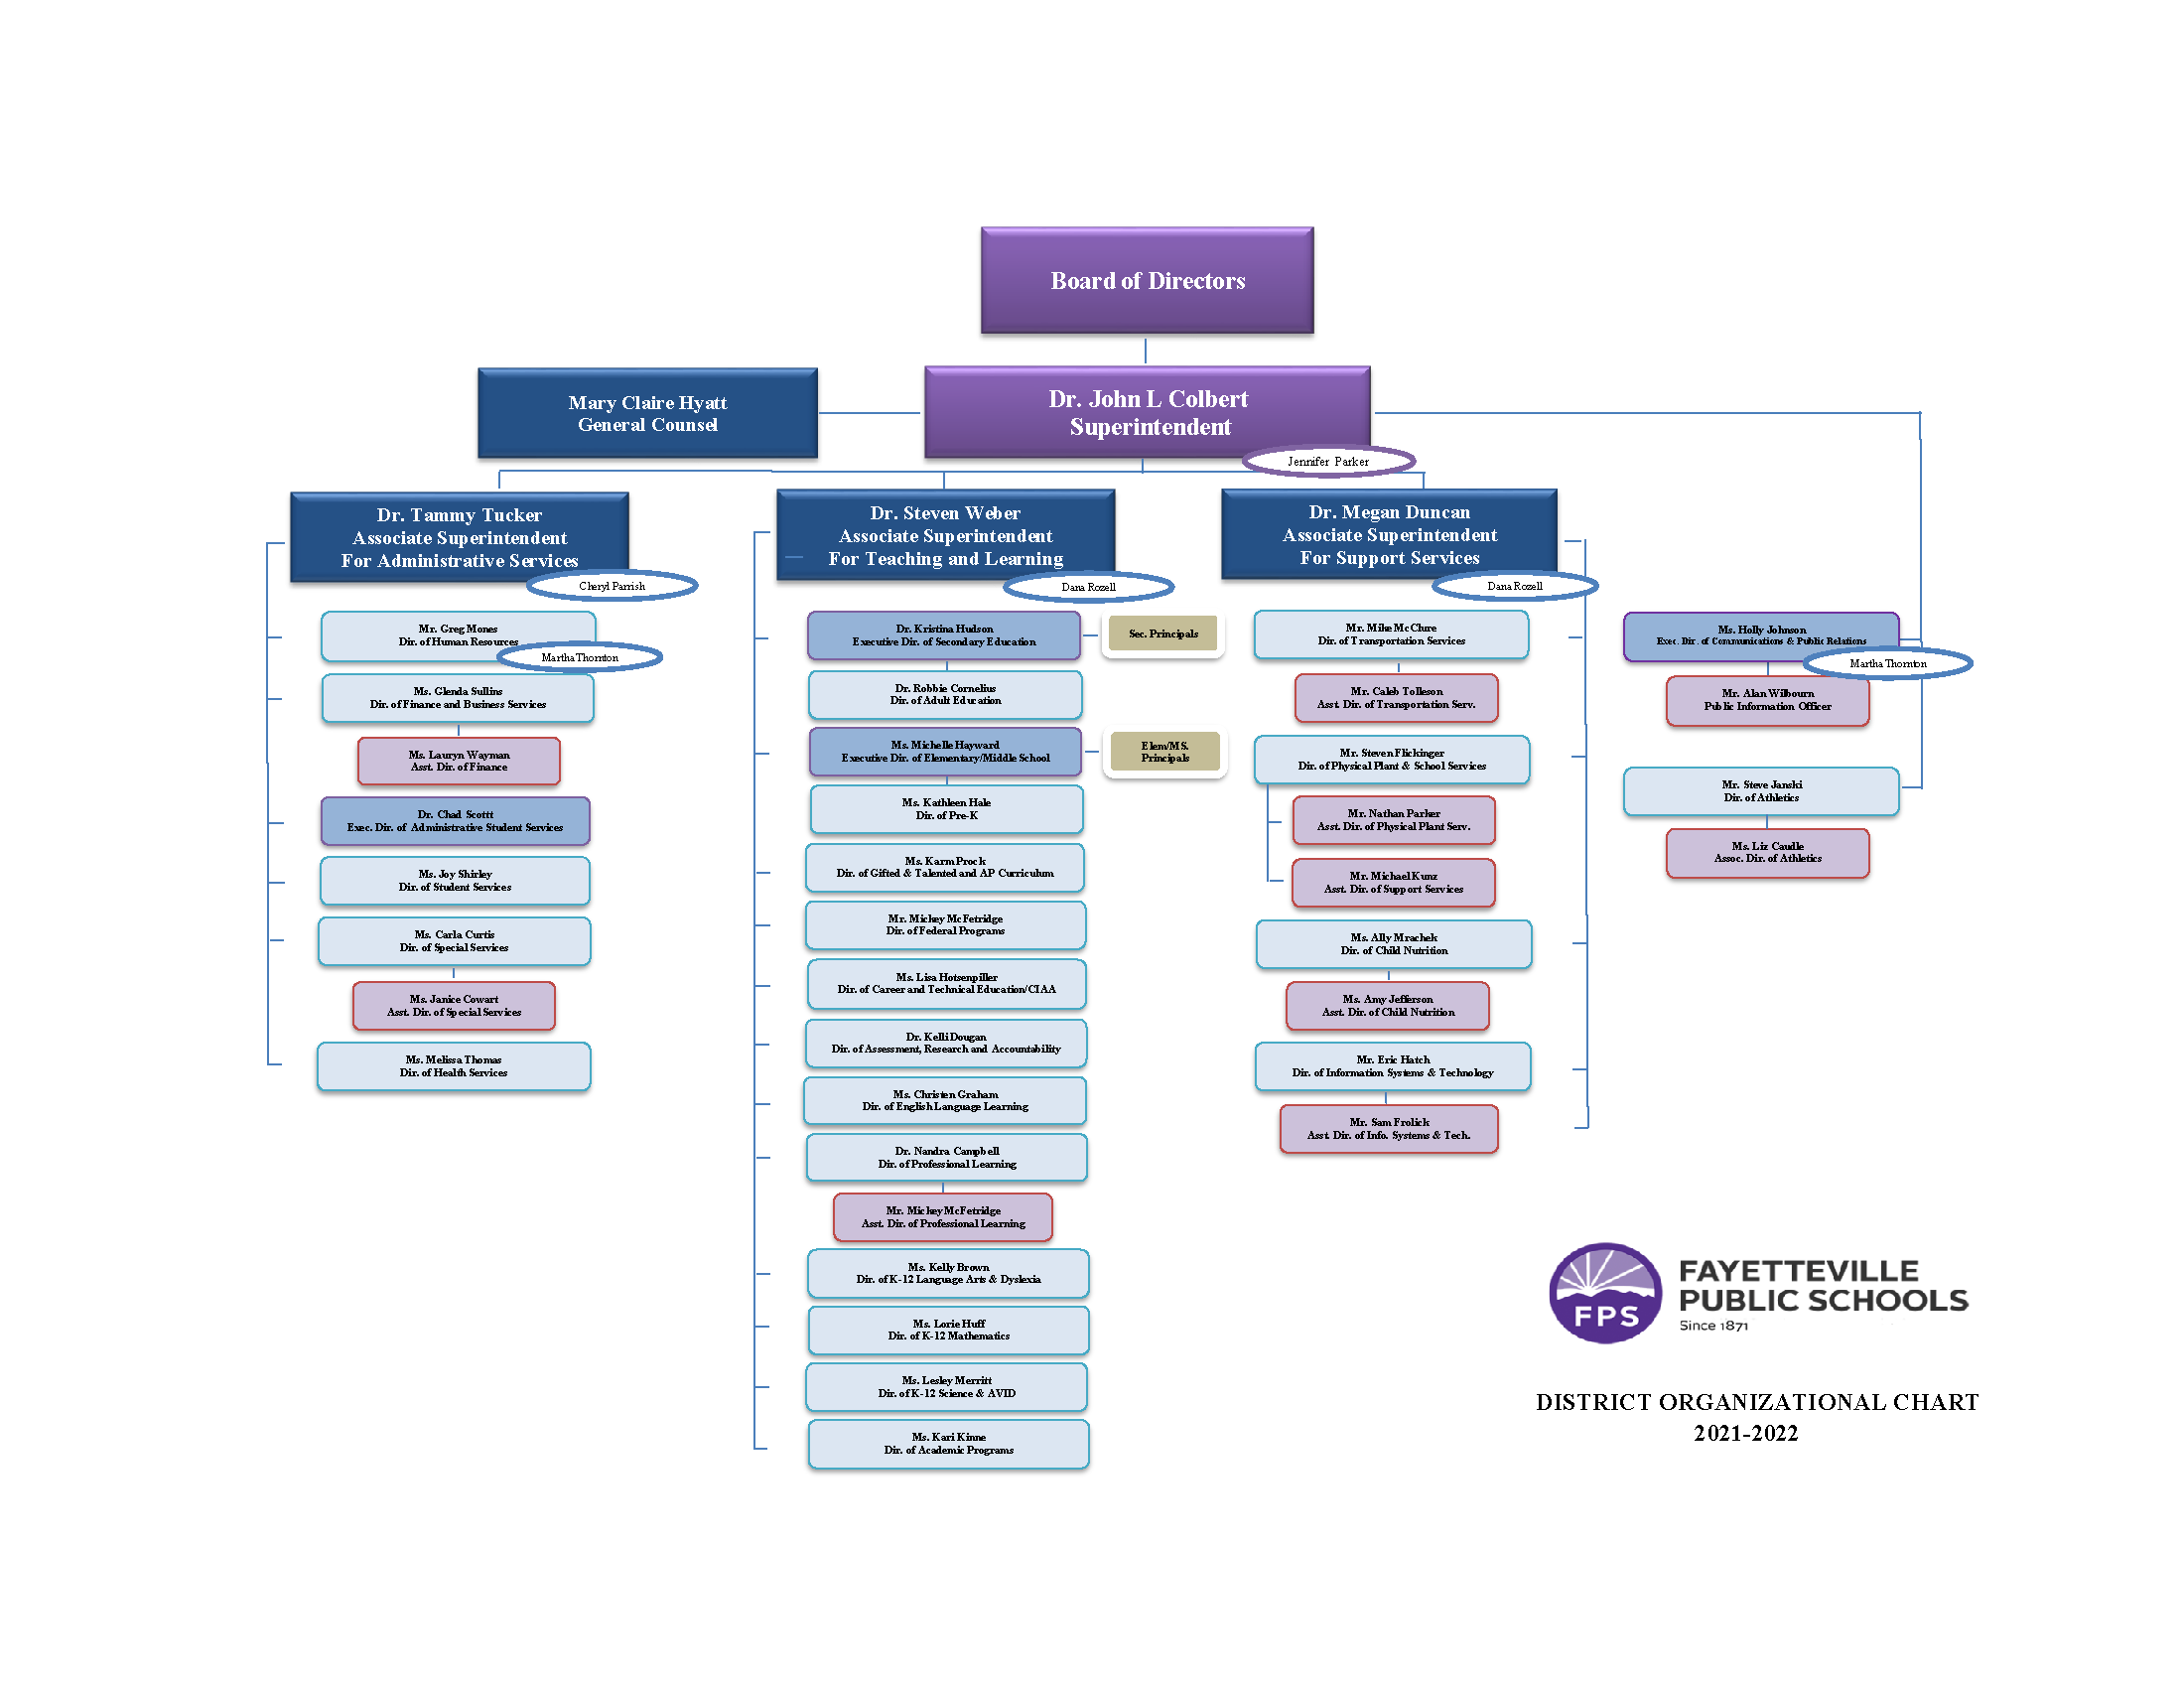 District Organizational Chart - Starts with Board of Directors at the top, then Dr. John L Colbert next in line and lists directors and direct reports. All of this information can be found under Explore...Administrative Directory.